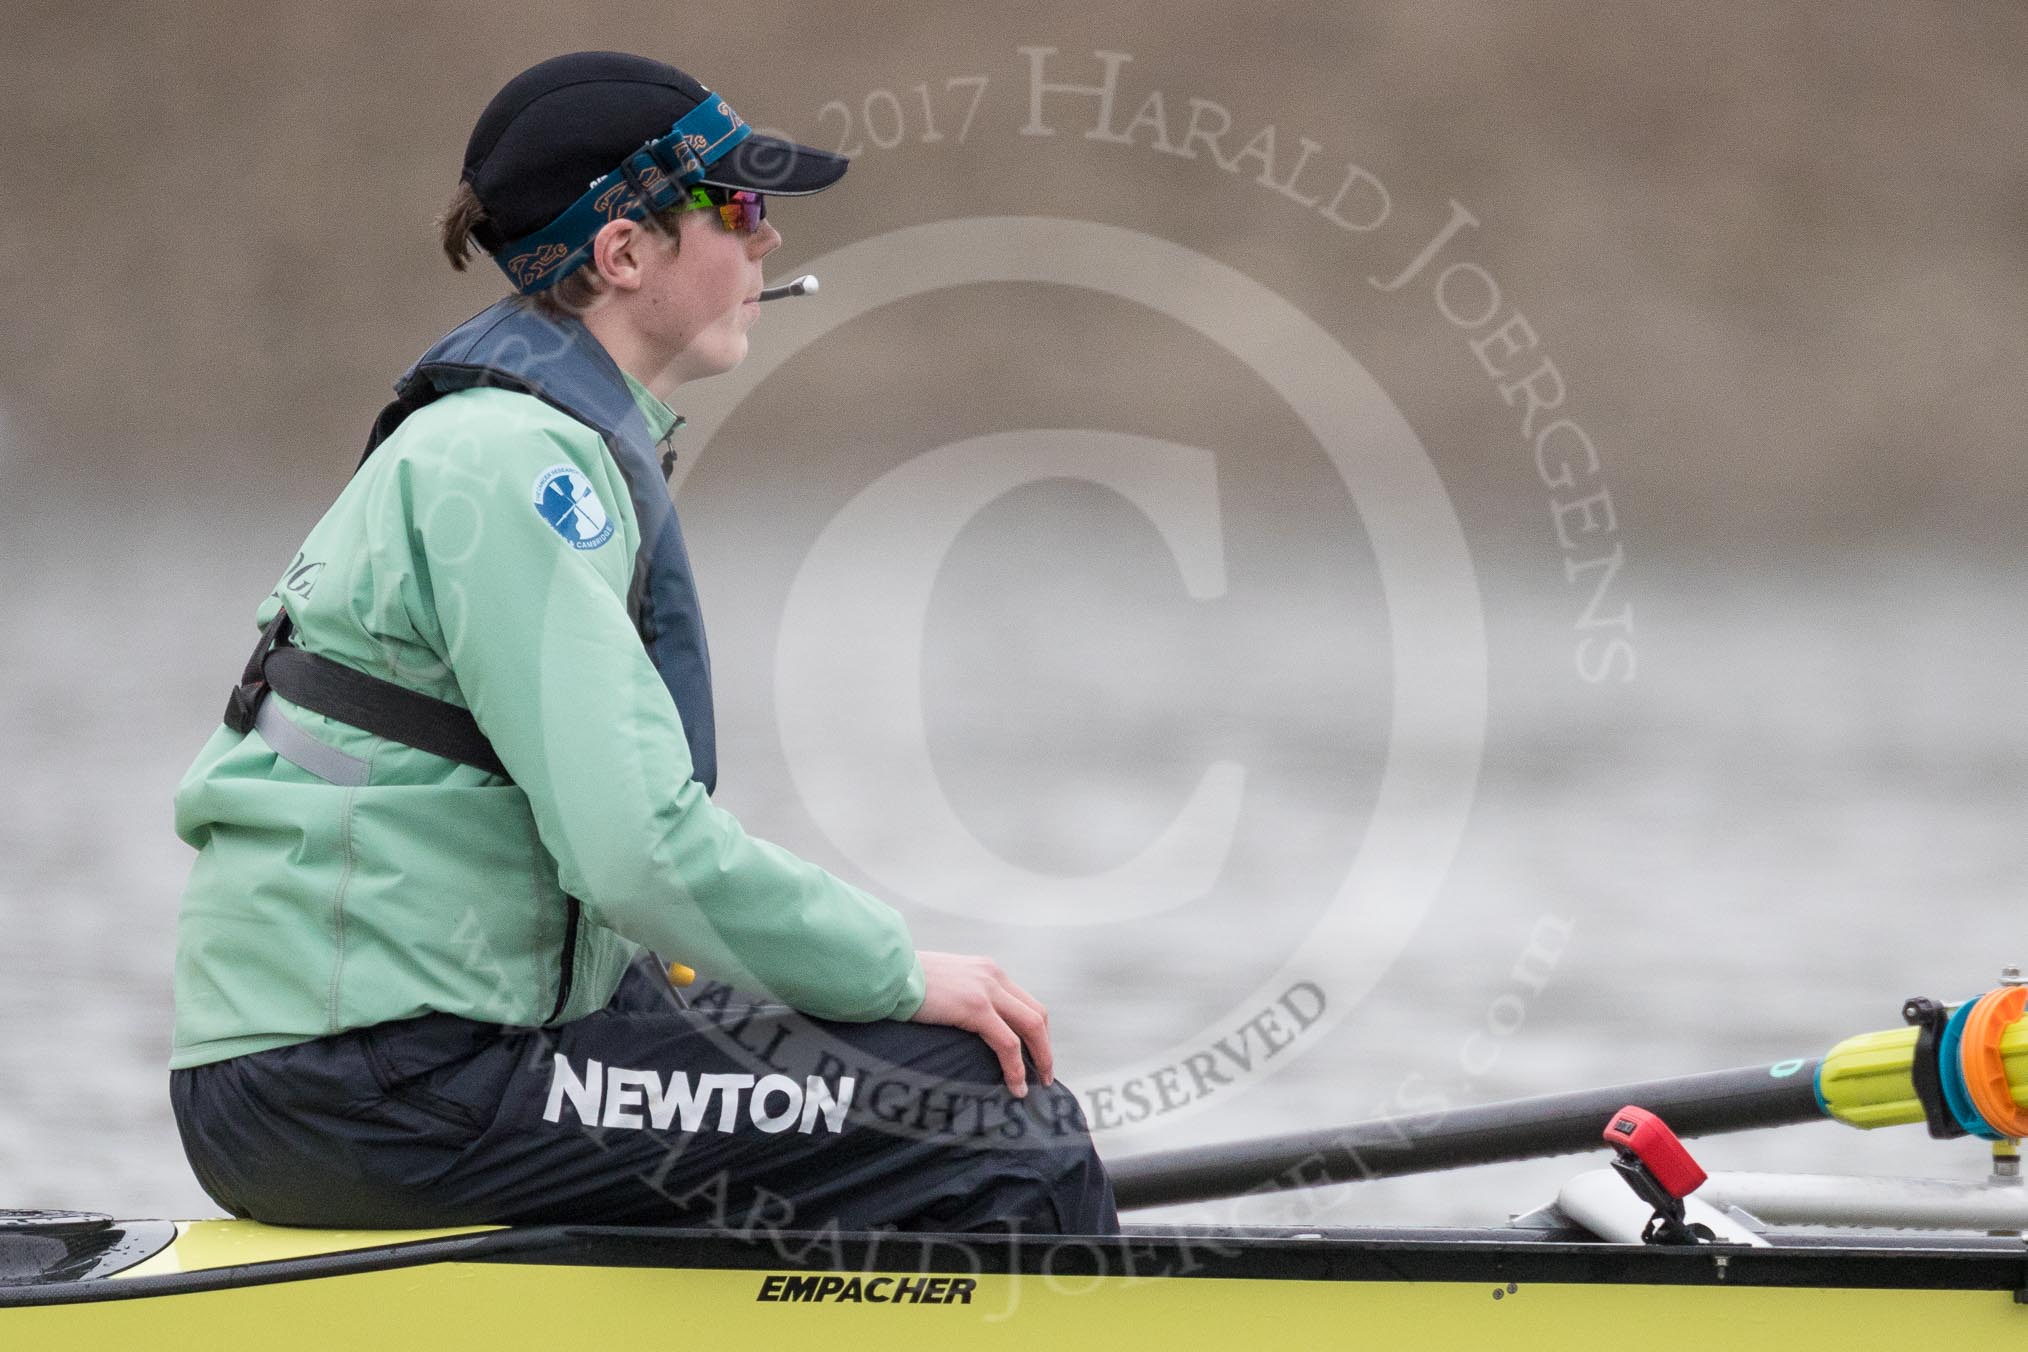 The Boat Race season 2017 - Women's Boat Race Fixture CUWBC vs Univerity of London: The CUWBC eight before the start of the race, here cox  Matthew Holland.
River Thames between Putney Bridge and Mortlake,
London SW15,

United Kingdom,
on 19 February 2017 at 15:53, image #38